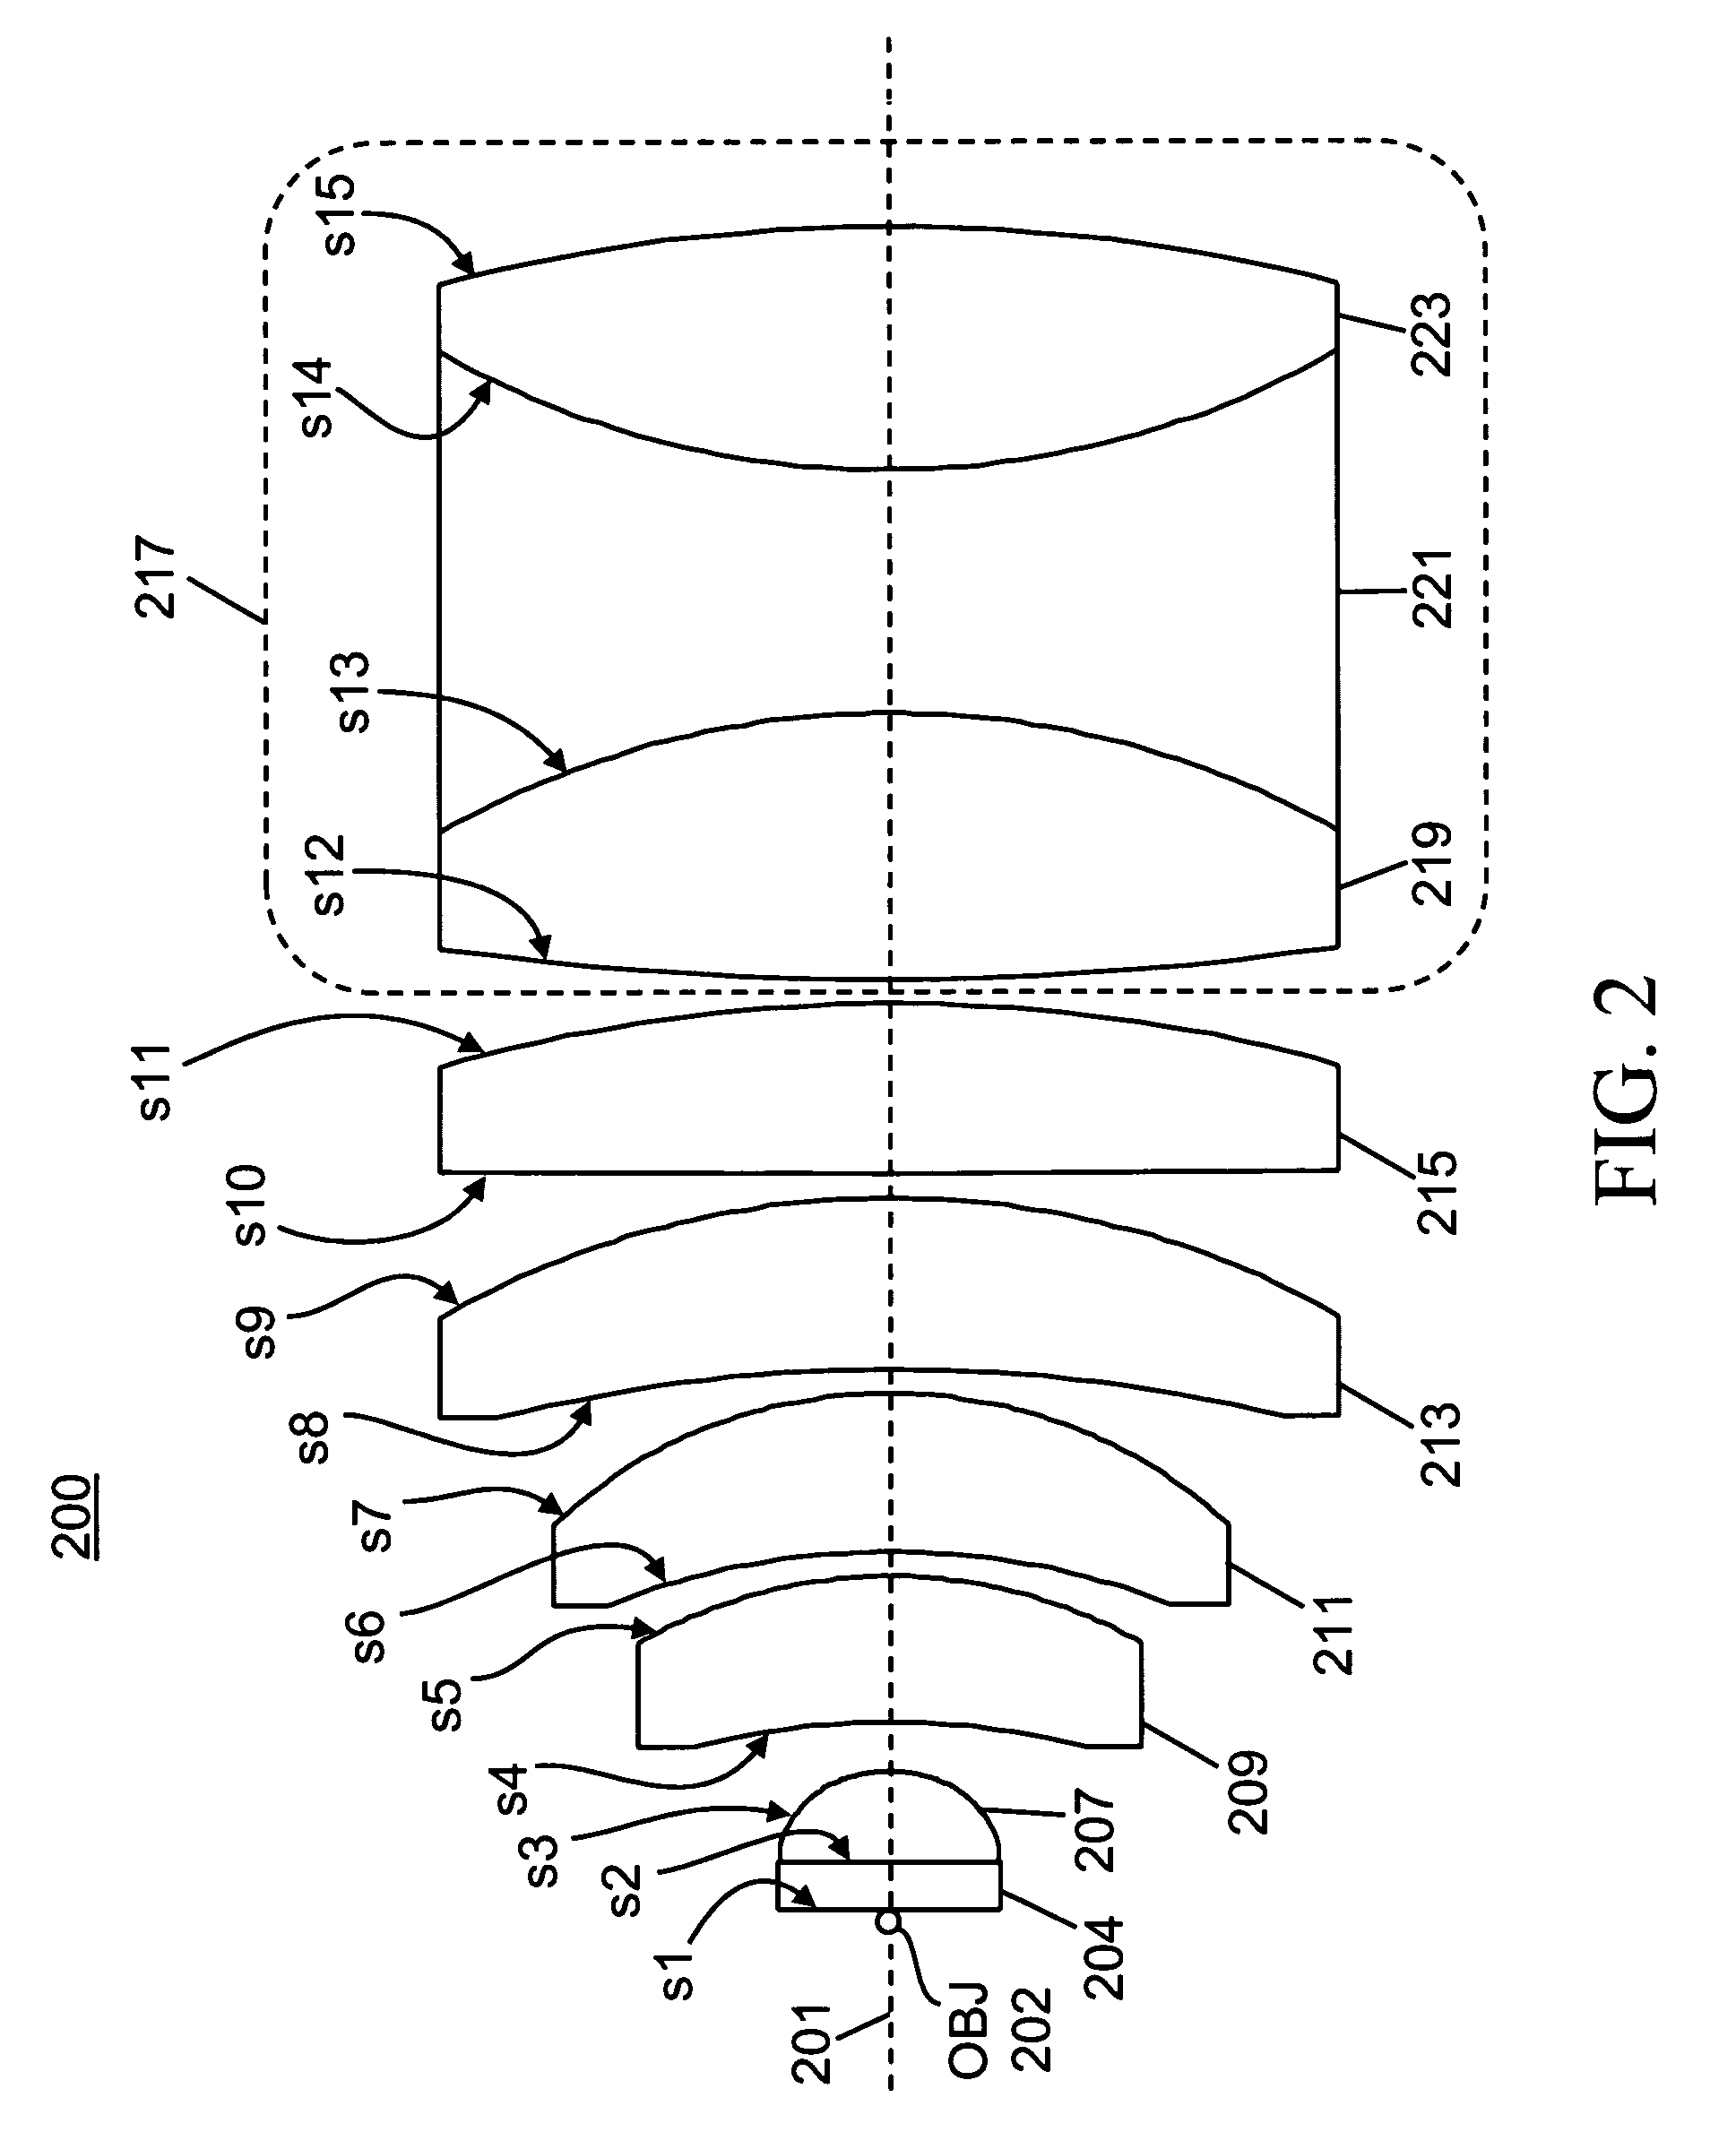 System and method for a composite lens for a flow cytometer